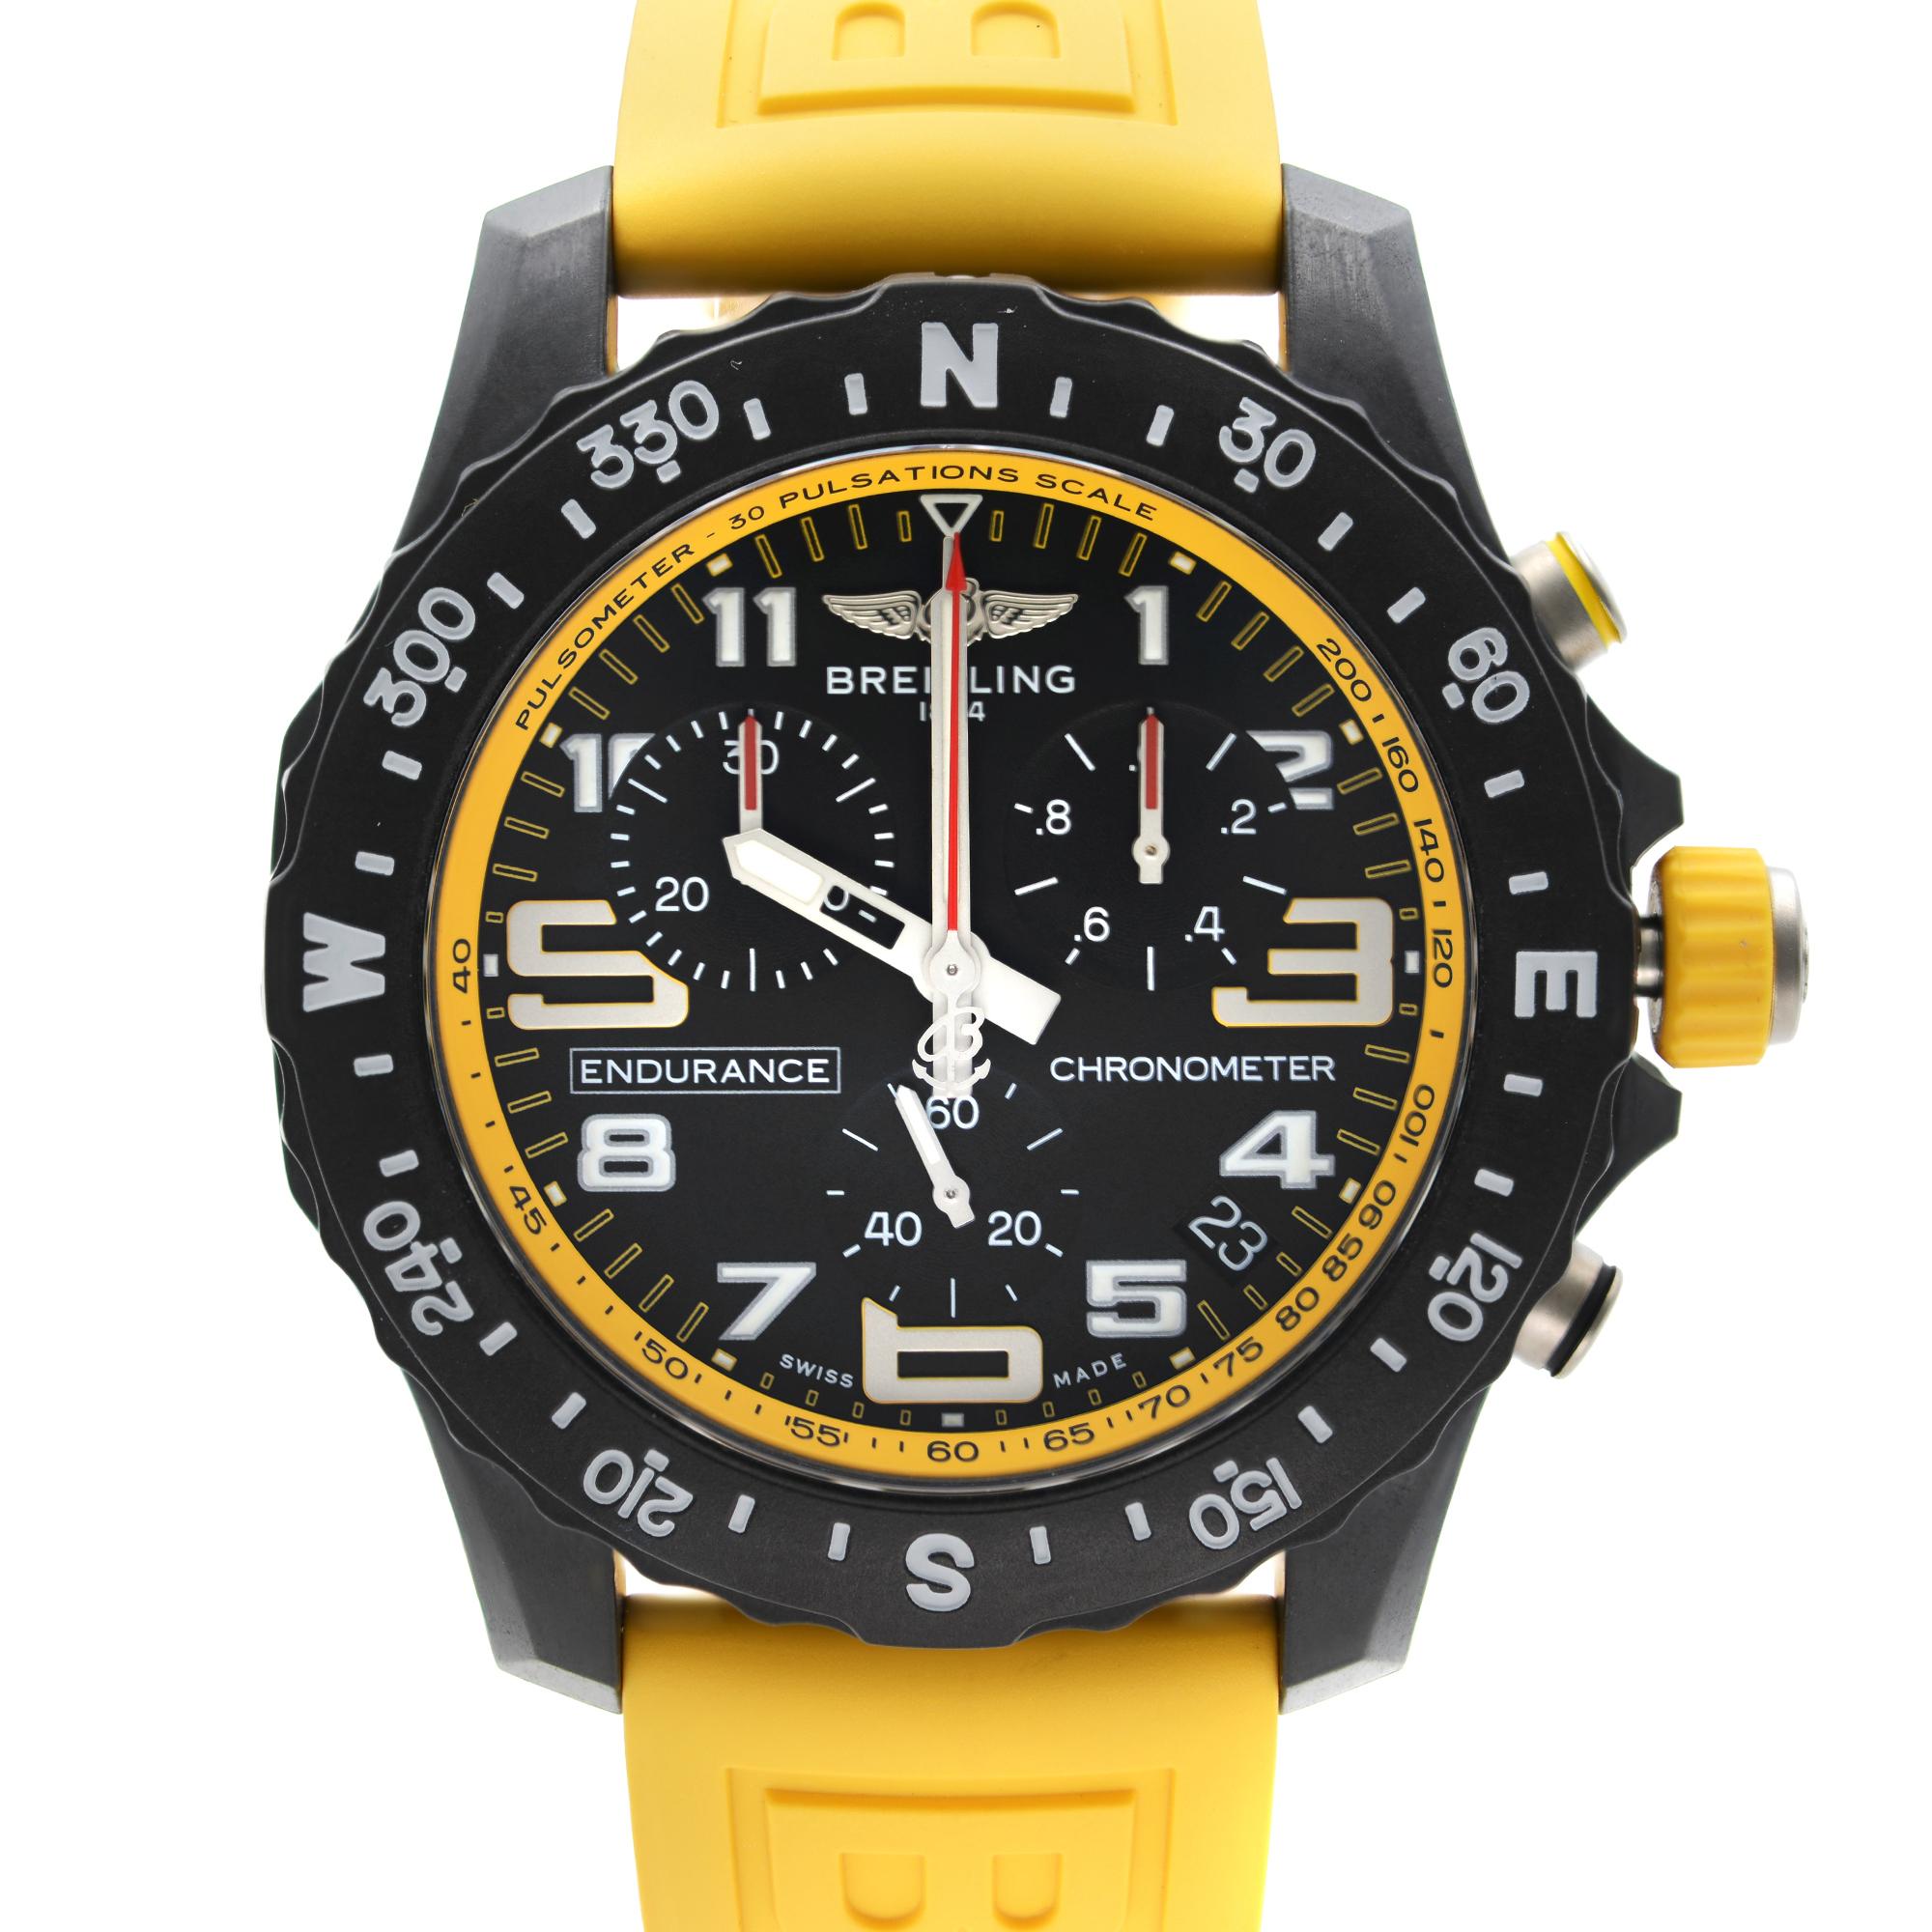 Unworn with Original Back Sticker Breitling Endurance Pro Breitlight Yellow Straps Black Dial Quartz Men's Watch X82310A41B1S1. This Beautiful Timepiece Features: Black Composite Case with A Yellow Rubber Strap, Black Composite Bezel, Black Dial